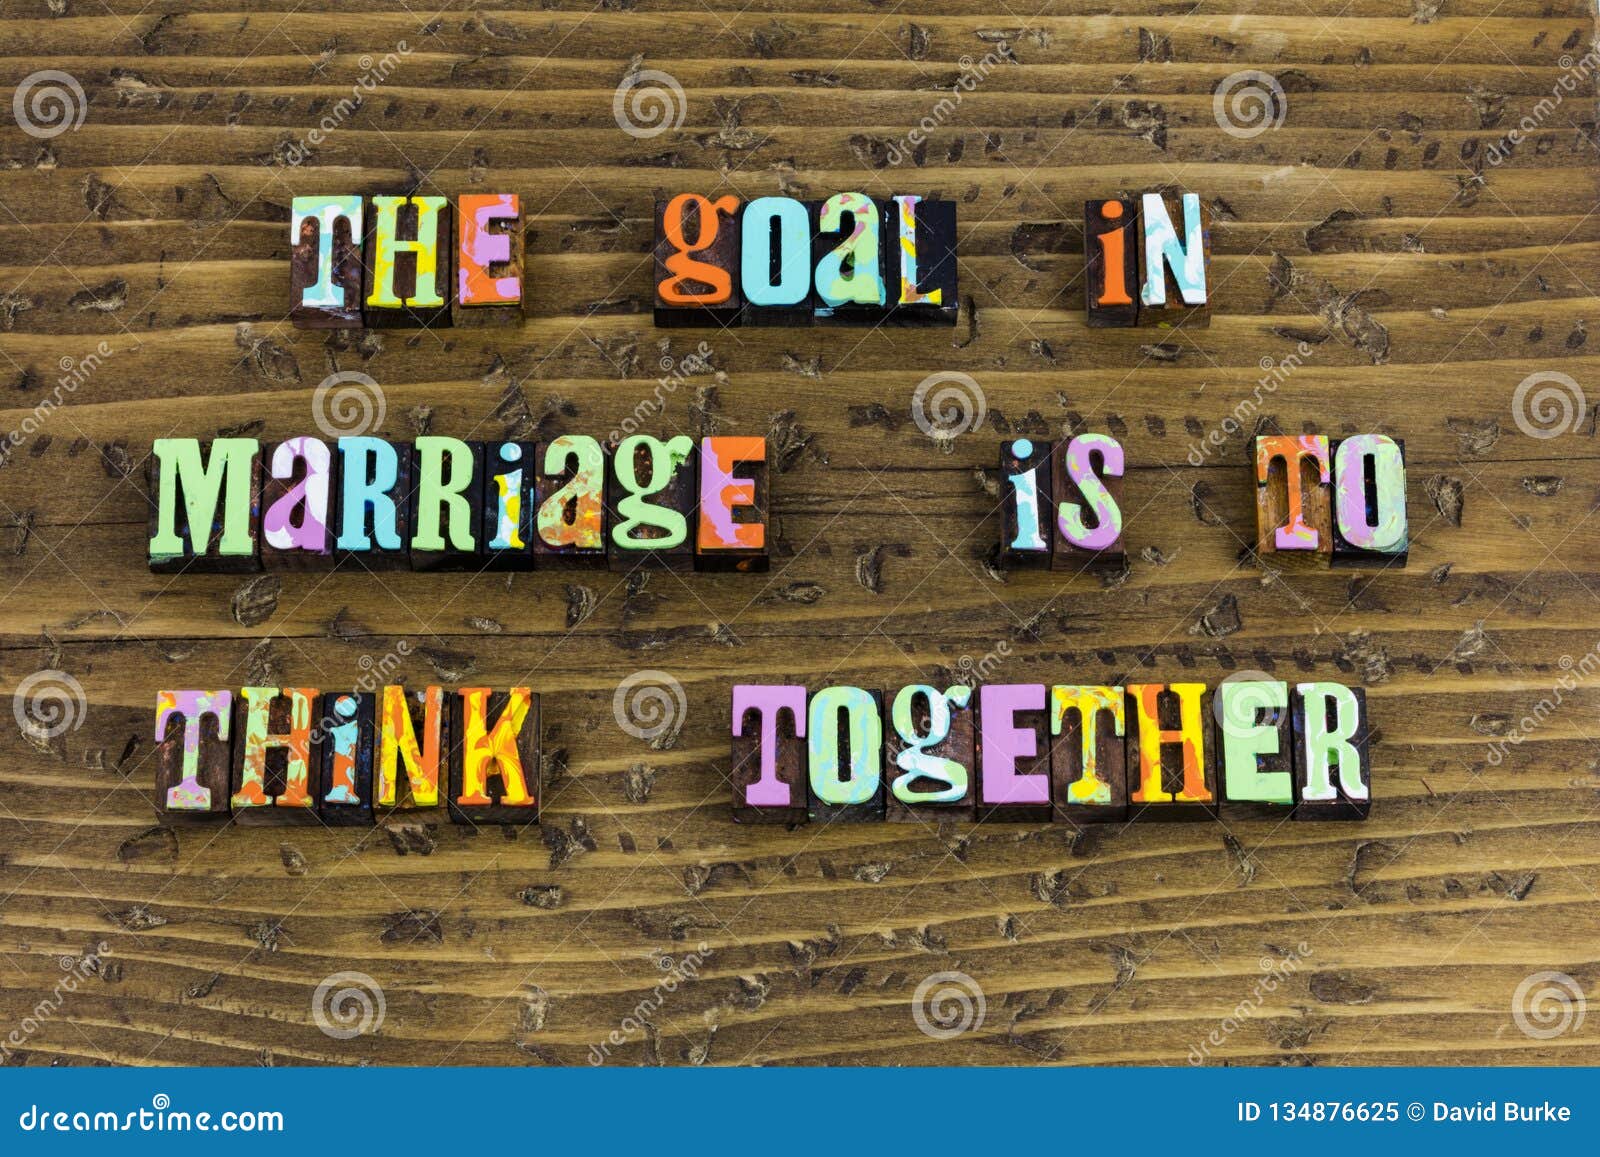 Marriage Goal Together Support Think Stock Image - Image of letters ...